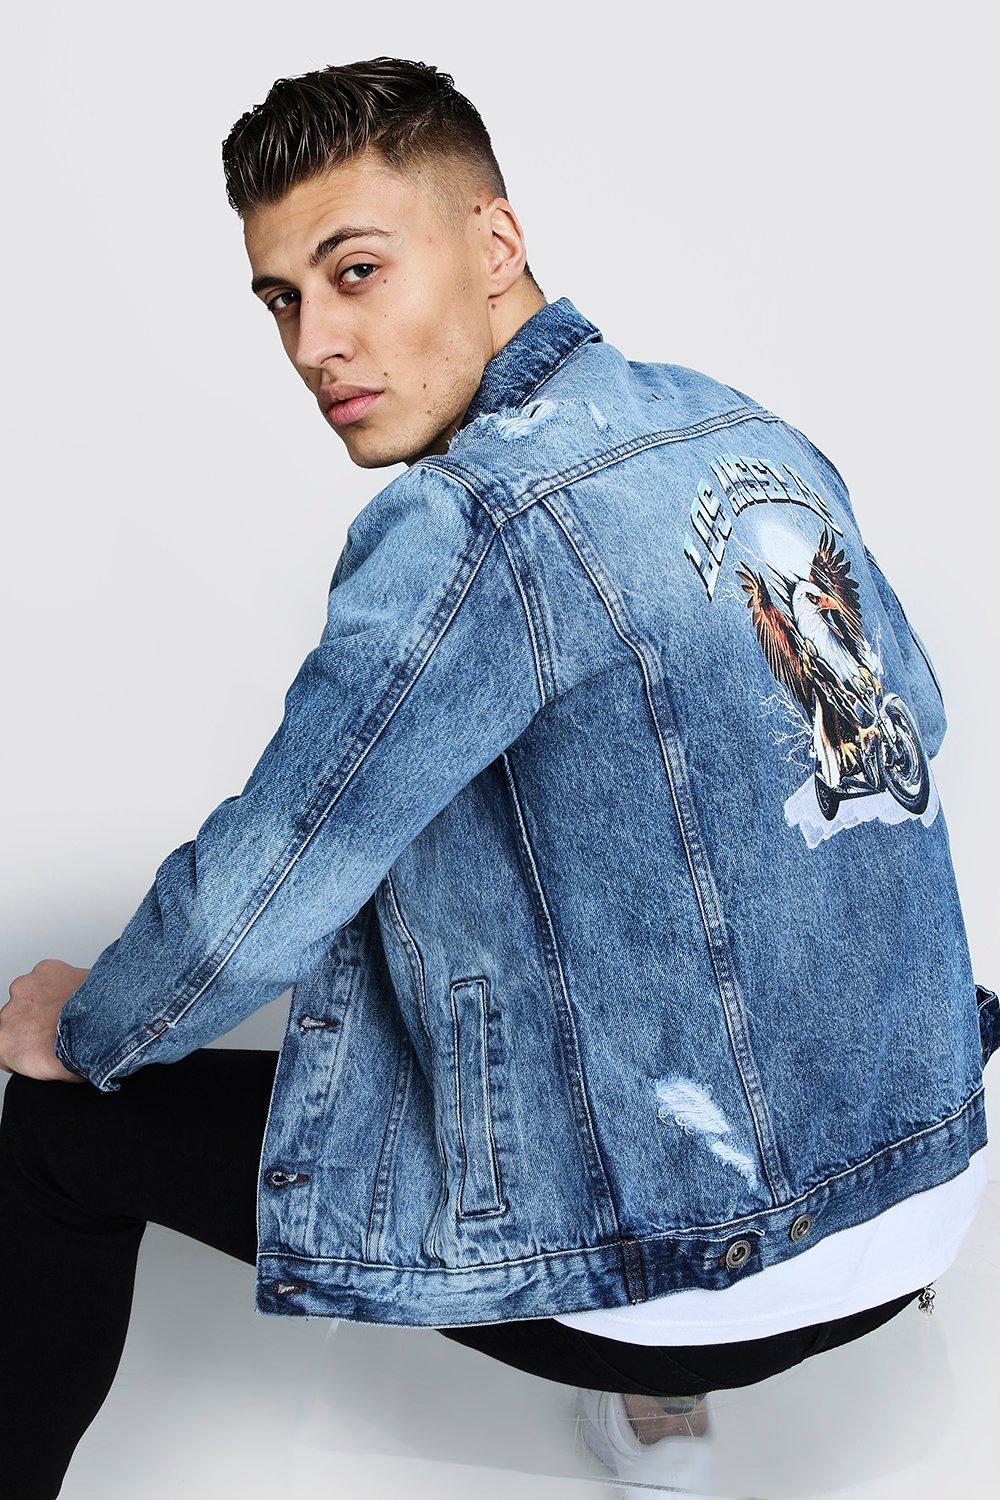 denim jacket with print on the back